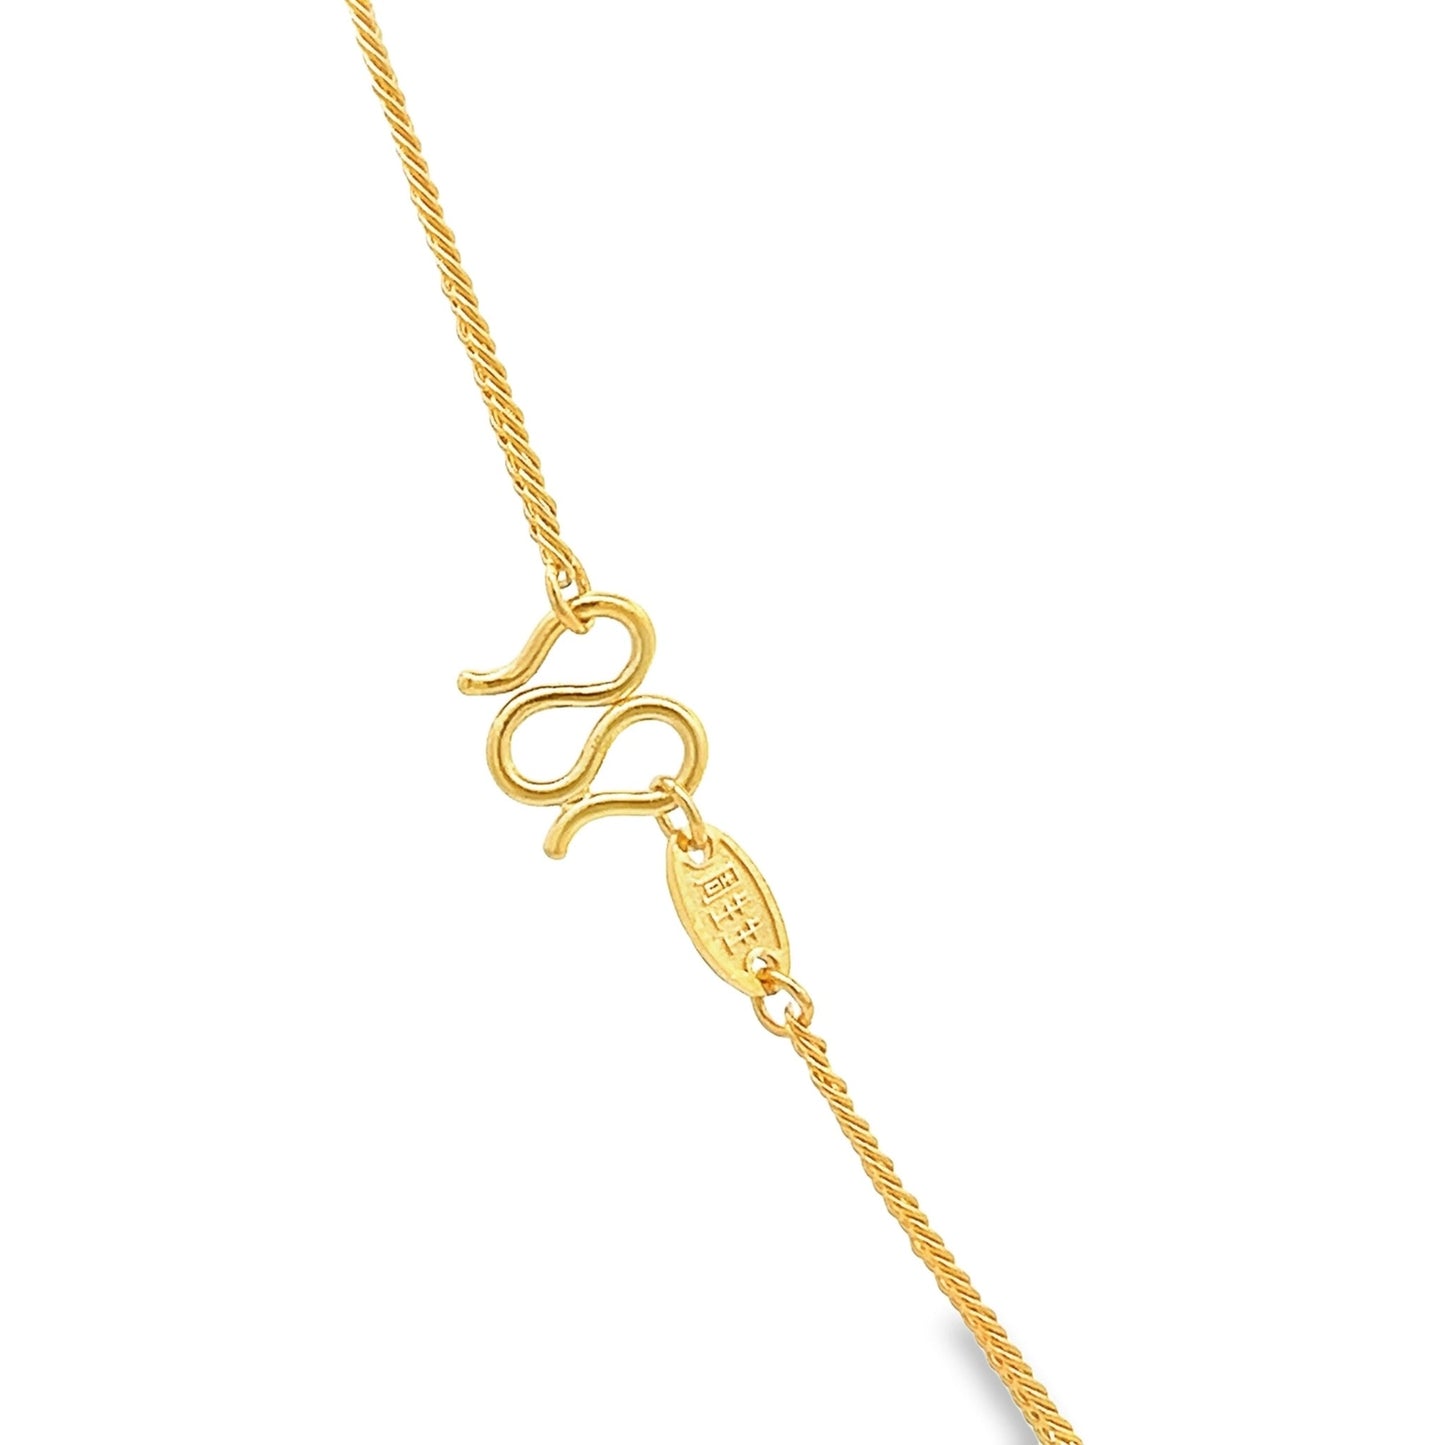 24ct solid gold necklace 006617NecklaceRetroGold